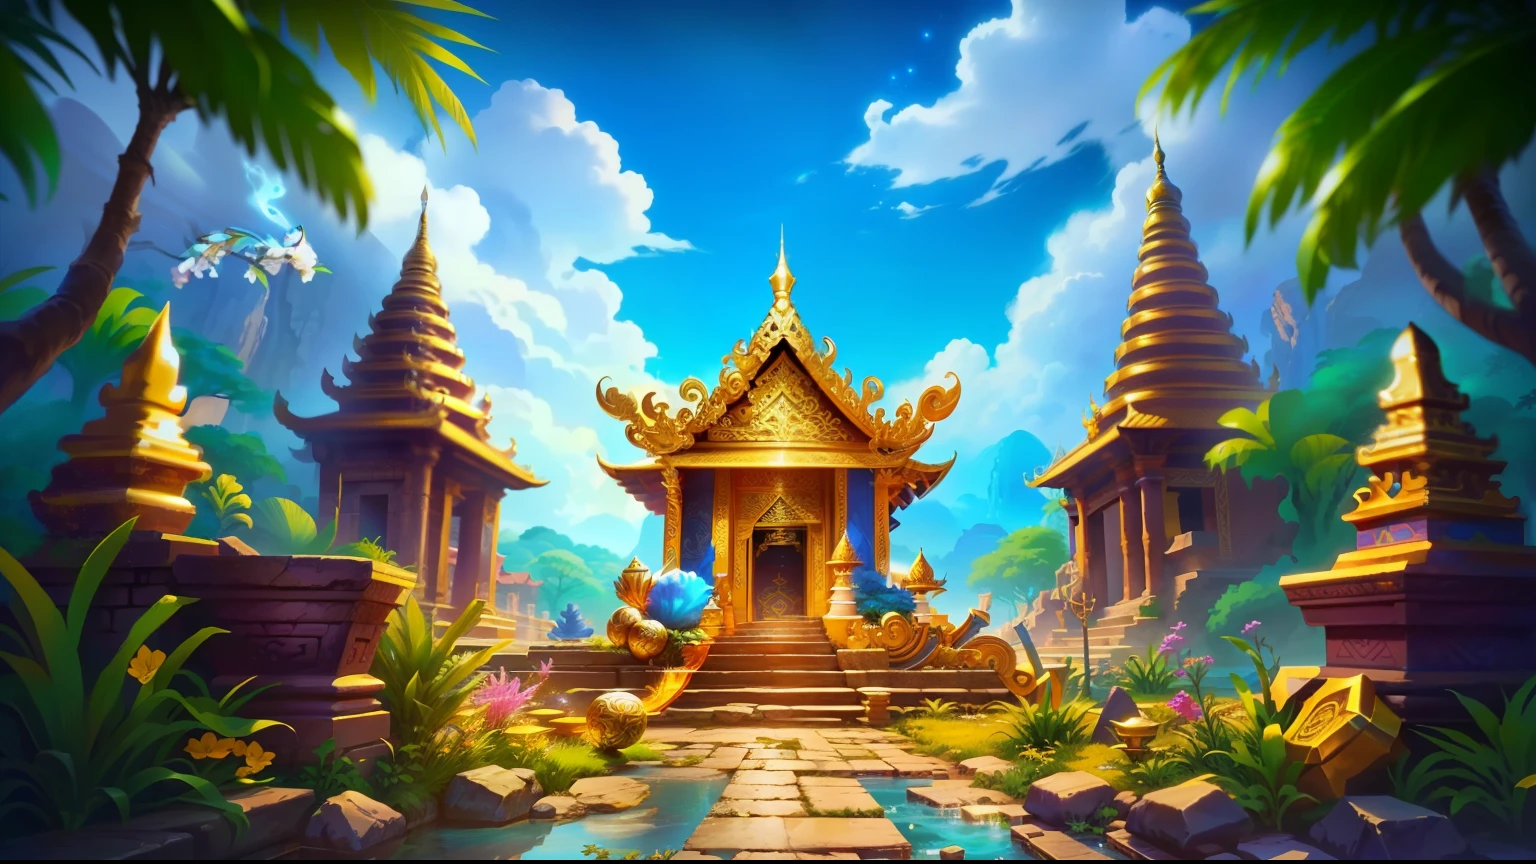 a close up of a stone floor with river behind, sky, game background, mobile game background, palace background, background artwork, background art, background image, background depicting a temple, epic background, treasure background, royal Thailand temple, videogame background, thailand asmosphere, thailand mood, jungle dummy, jungle pokdeng, official screenshot, detailed screenshot, official artwork, toki pona, pooka, game logo, high quality screenshot, pc screenshot, key art, loading screen, splash screen, screenshot, official splash art, high detailed official artwork, splash screen art, loading screen. 8k resolution, hd screenshot,